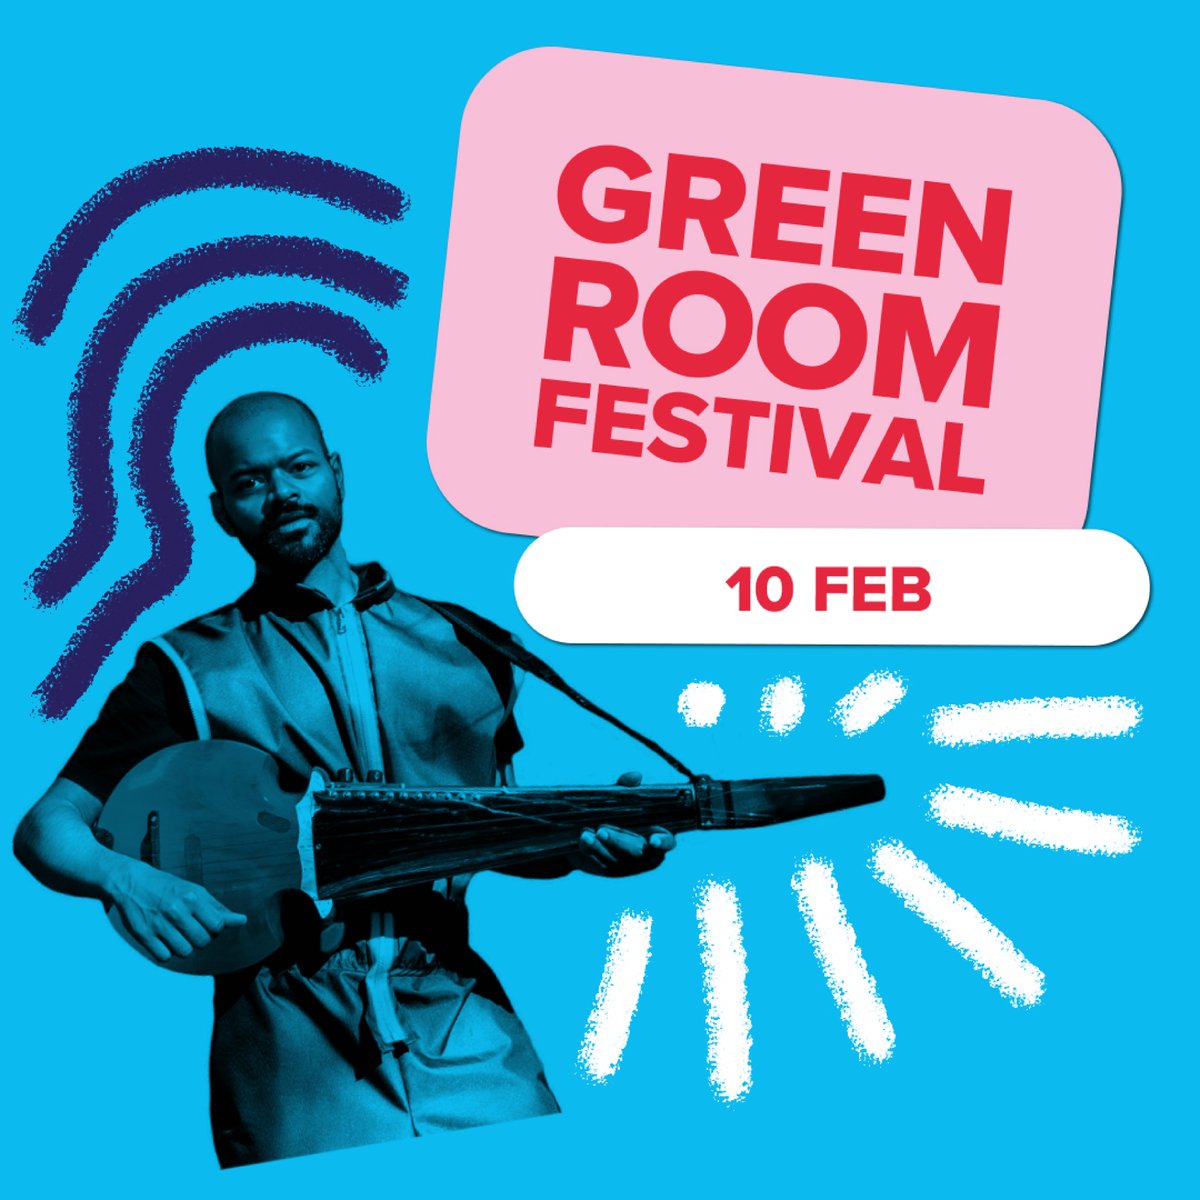 Hello London! 😍 Do you have your tickets for our first-ever Green Room Festival at @RichMixLondon yet? 📅10 Feb 💚Witness seven migrant and refugee artists as they weave music, dance and film together! richmix.org.uk/events/the-gre…